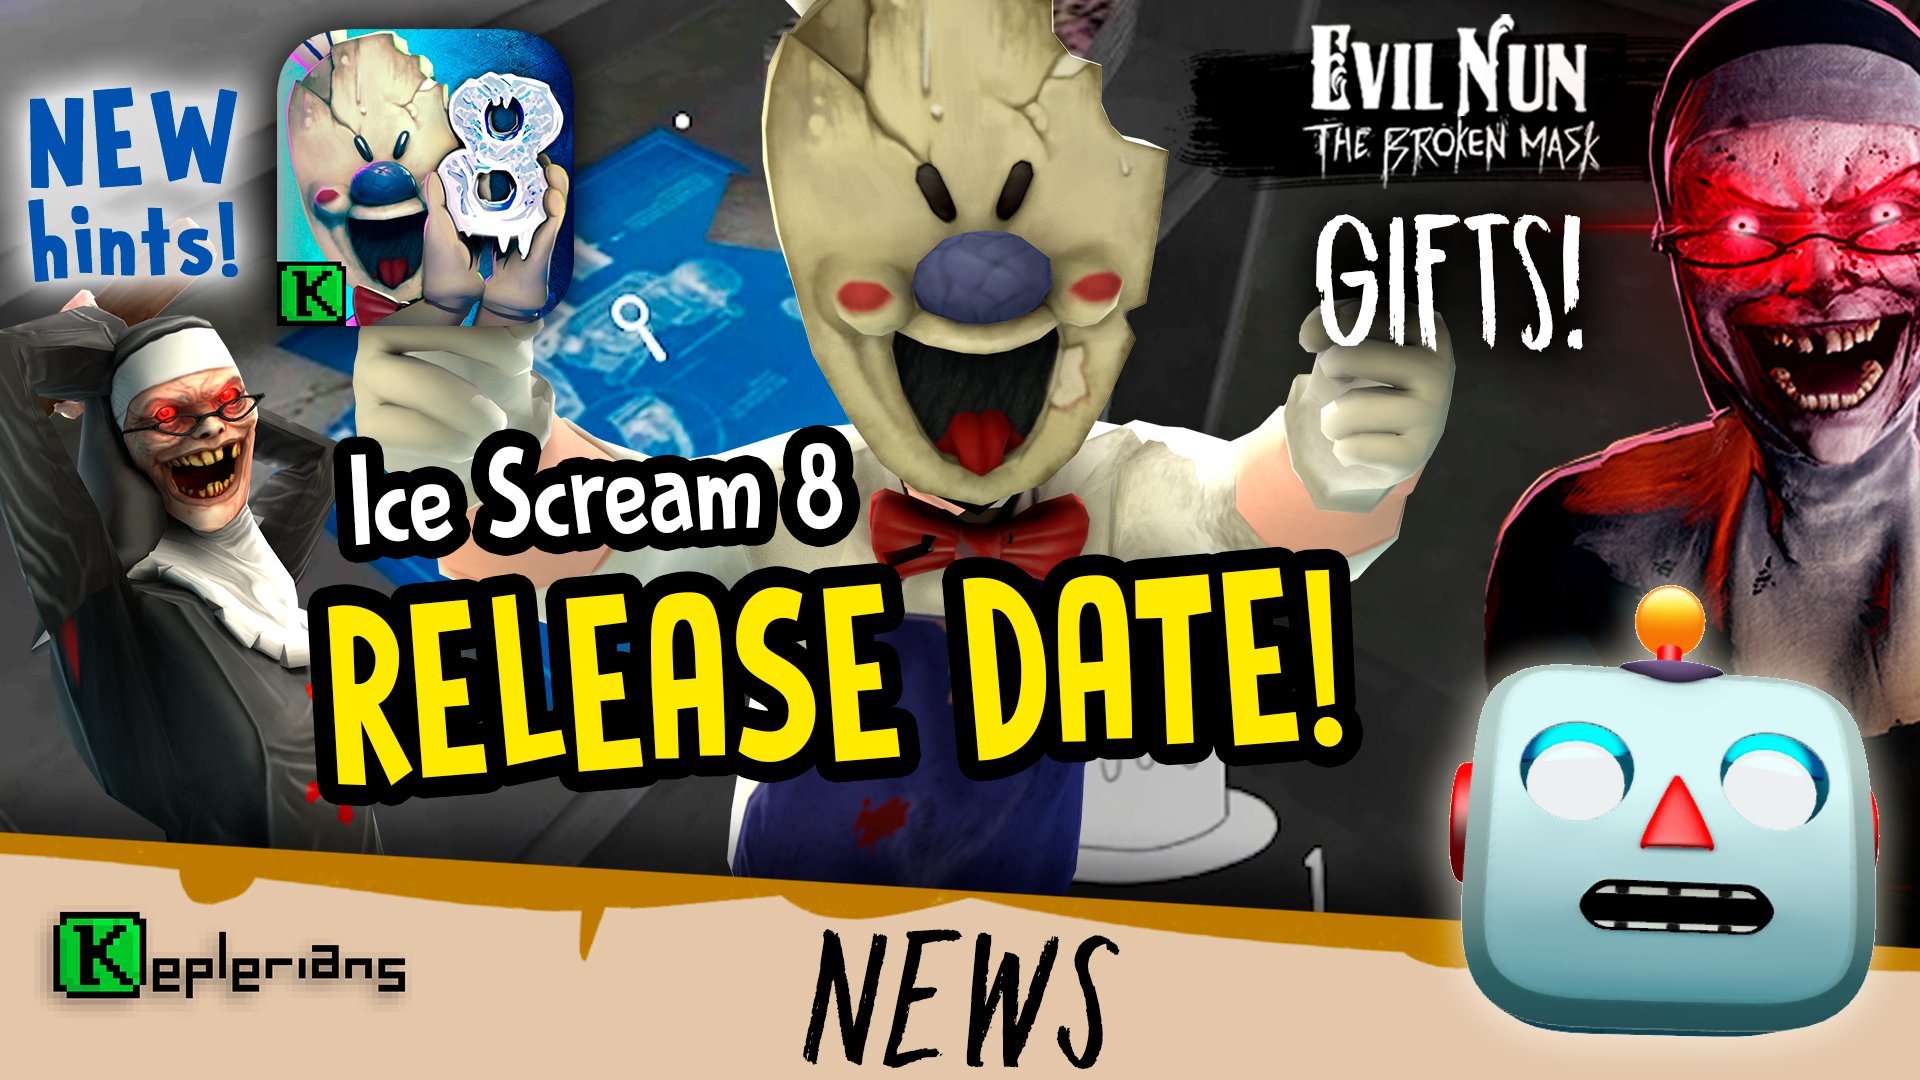 Ice Scream 5, the latest chapter in the Ice Scream game series, is out now  for iOS and Android